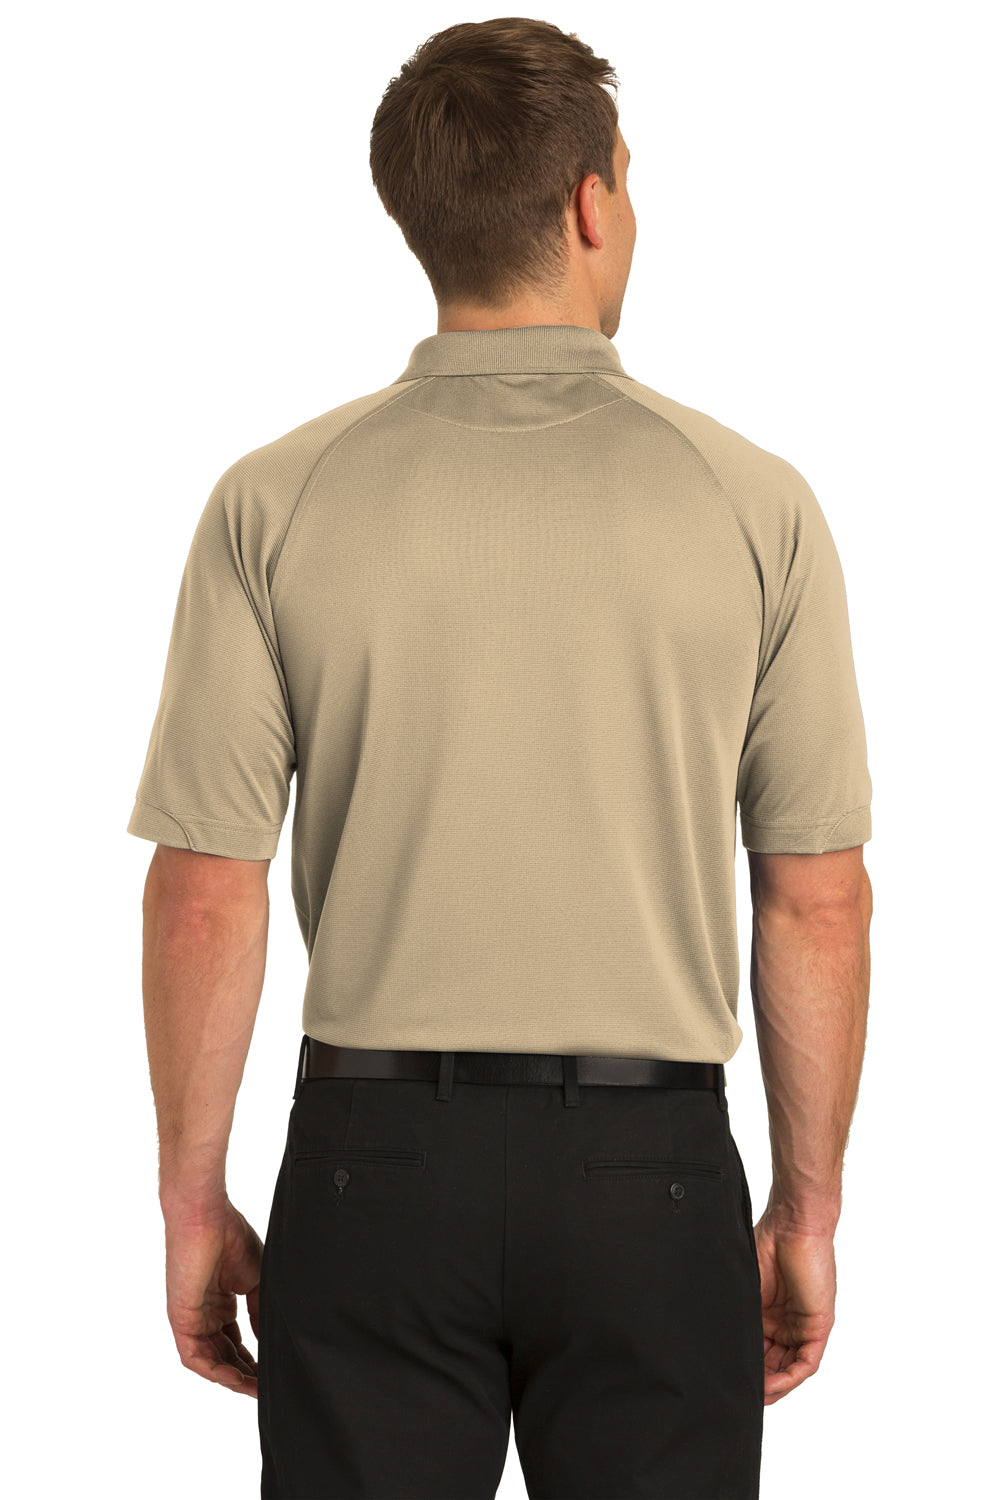 Port Authority K525 Mens Dry Zone Moisture Wicking Short Sleeve Polo Shirt Stone Brown Back